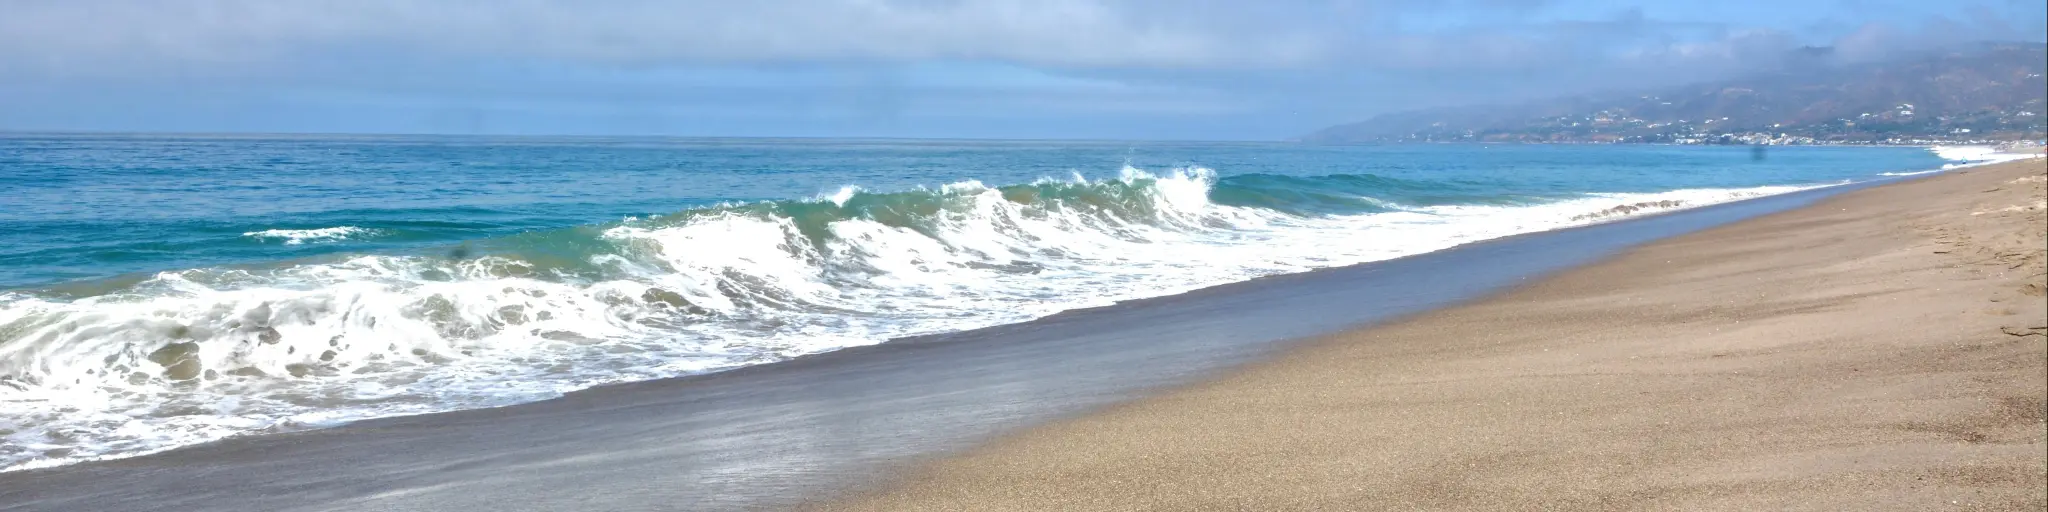 Sandy shores, rolling waves and blue skies across Zuma Beach